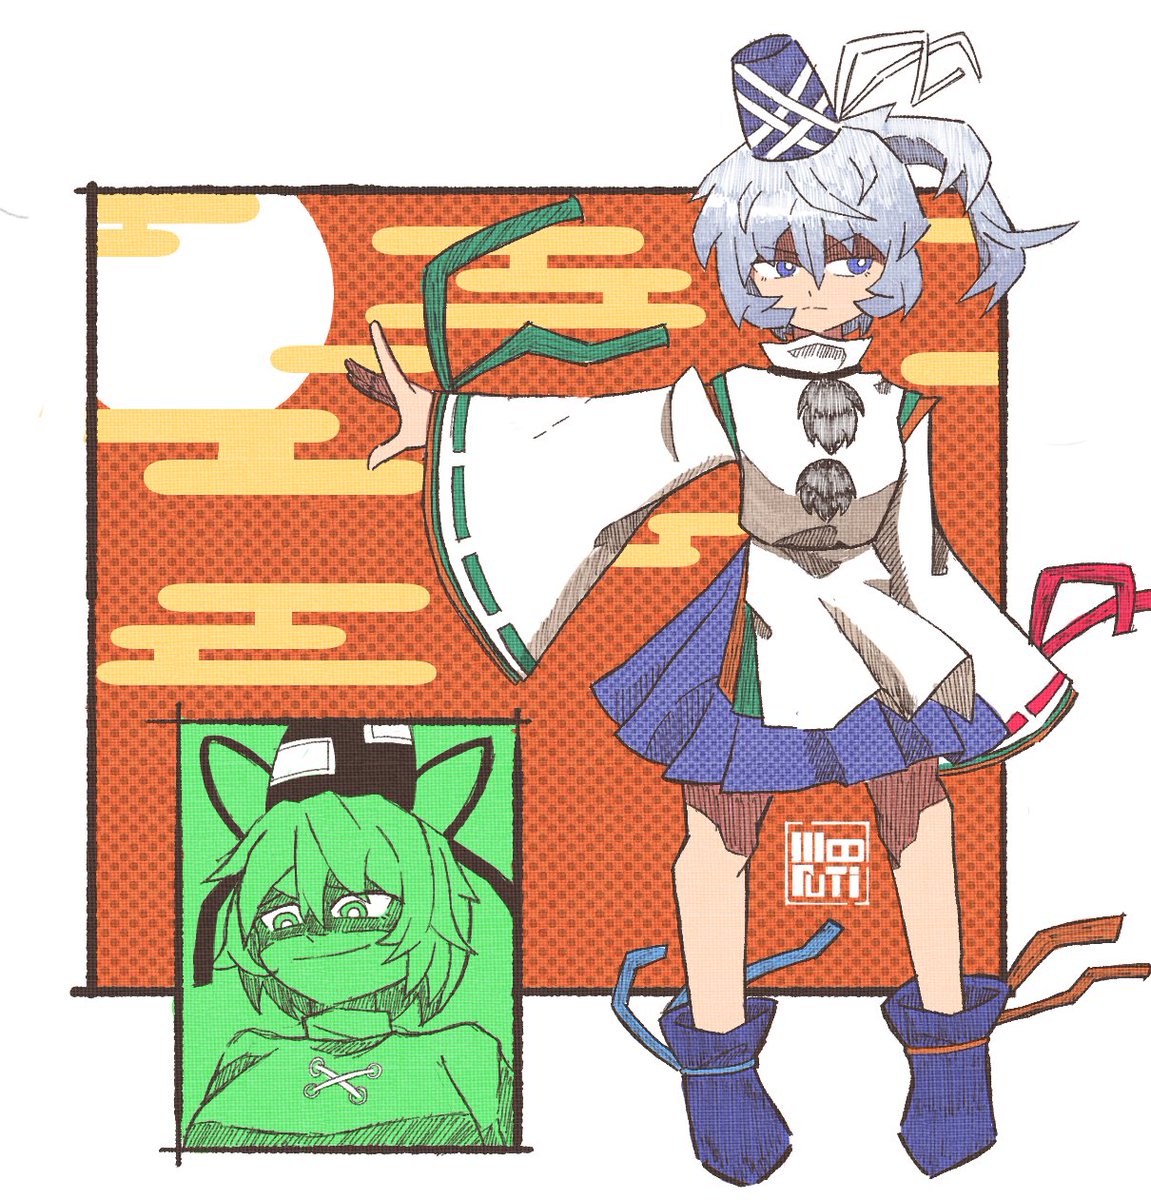 Touhou.
Another old drawing I thought I lost.